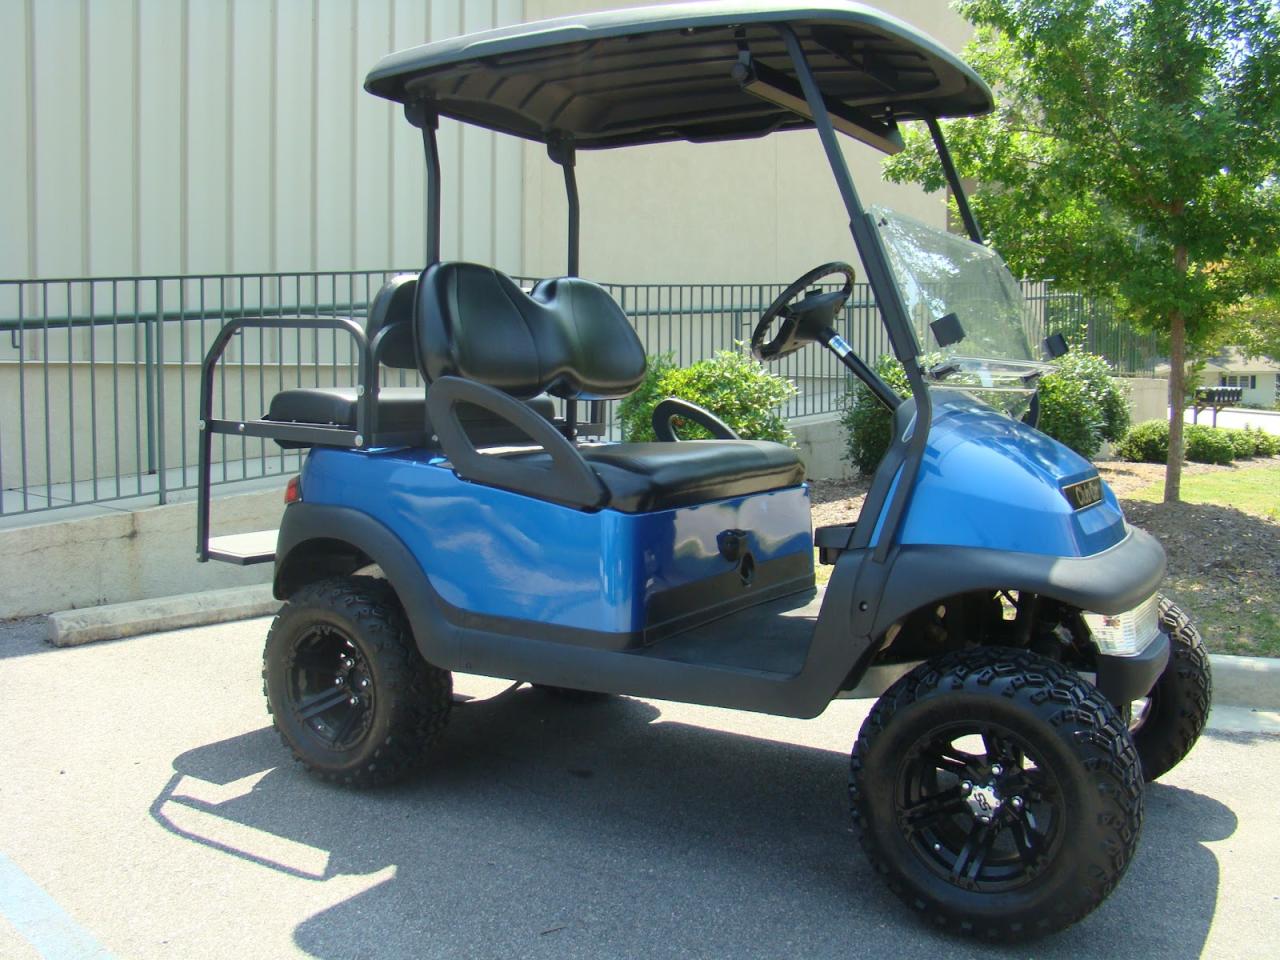 Used Golf Carts for Sale by Owner in Lawrence, Tennessee: Explore the Best Deals